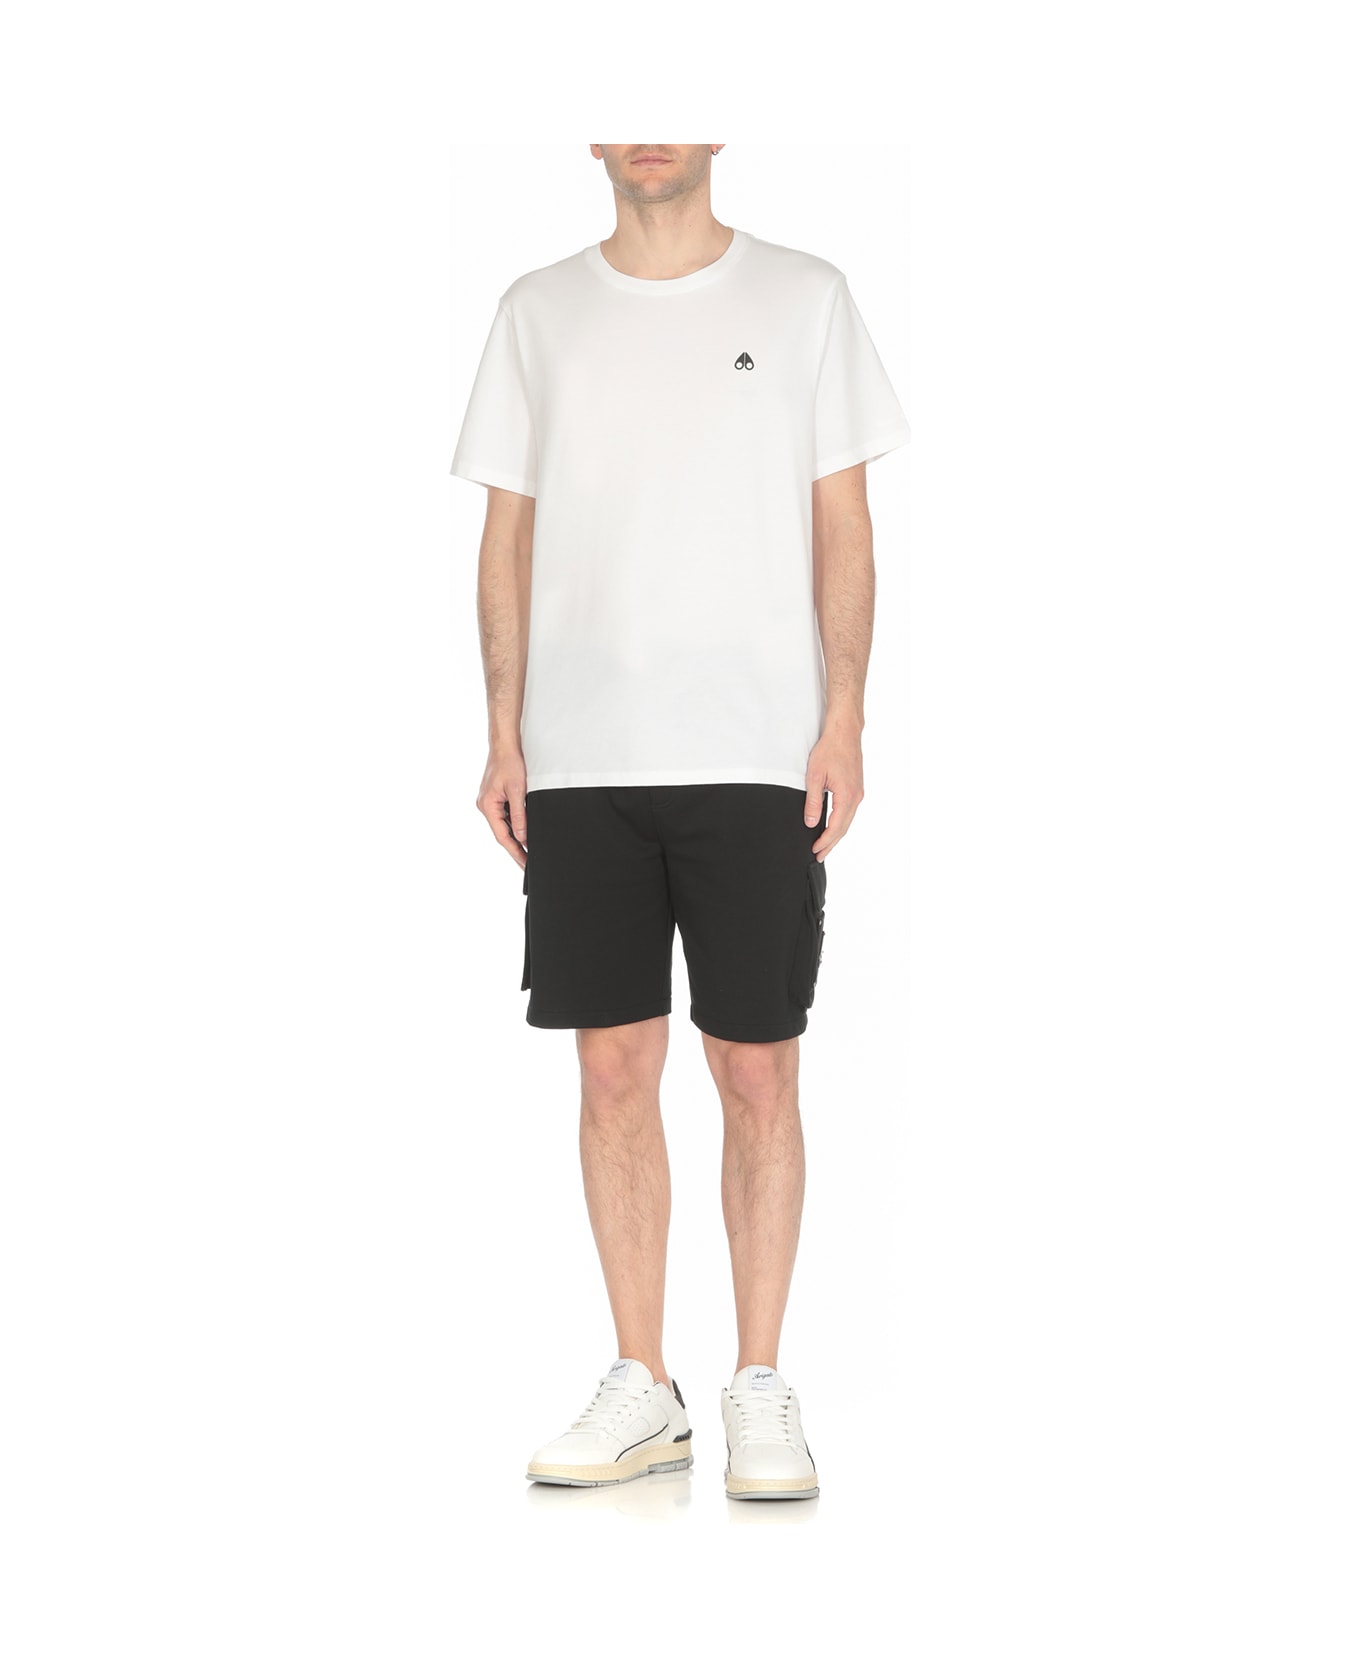 Moose Knuckles Logoed T-shirt - White シャツ